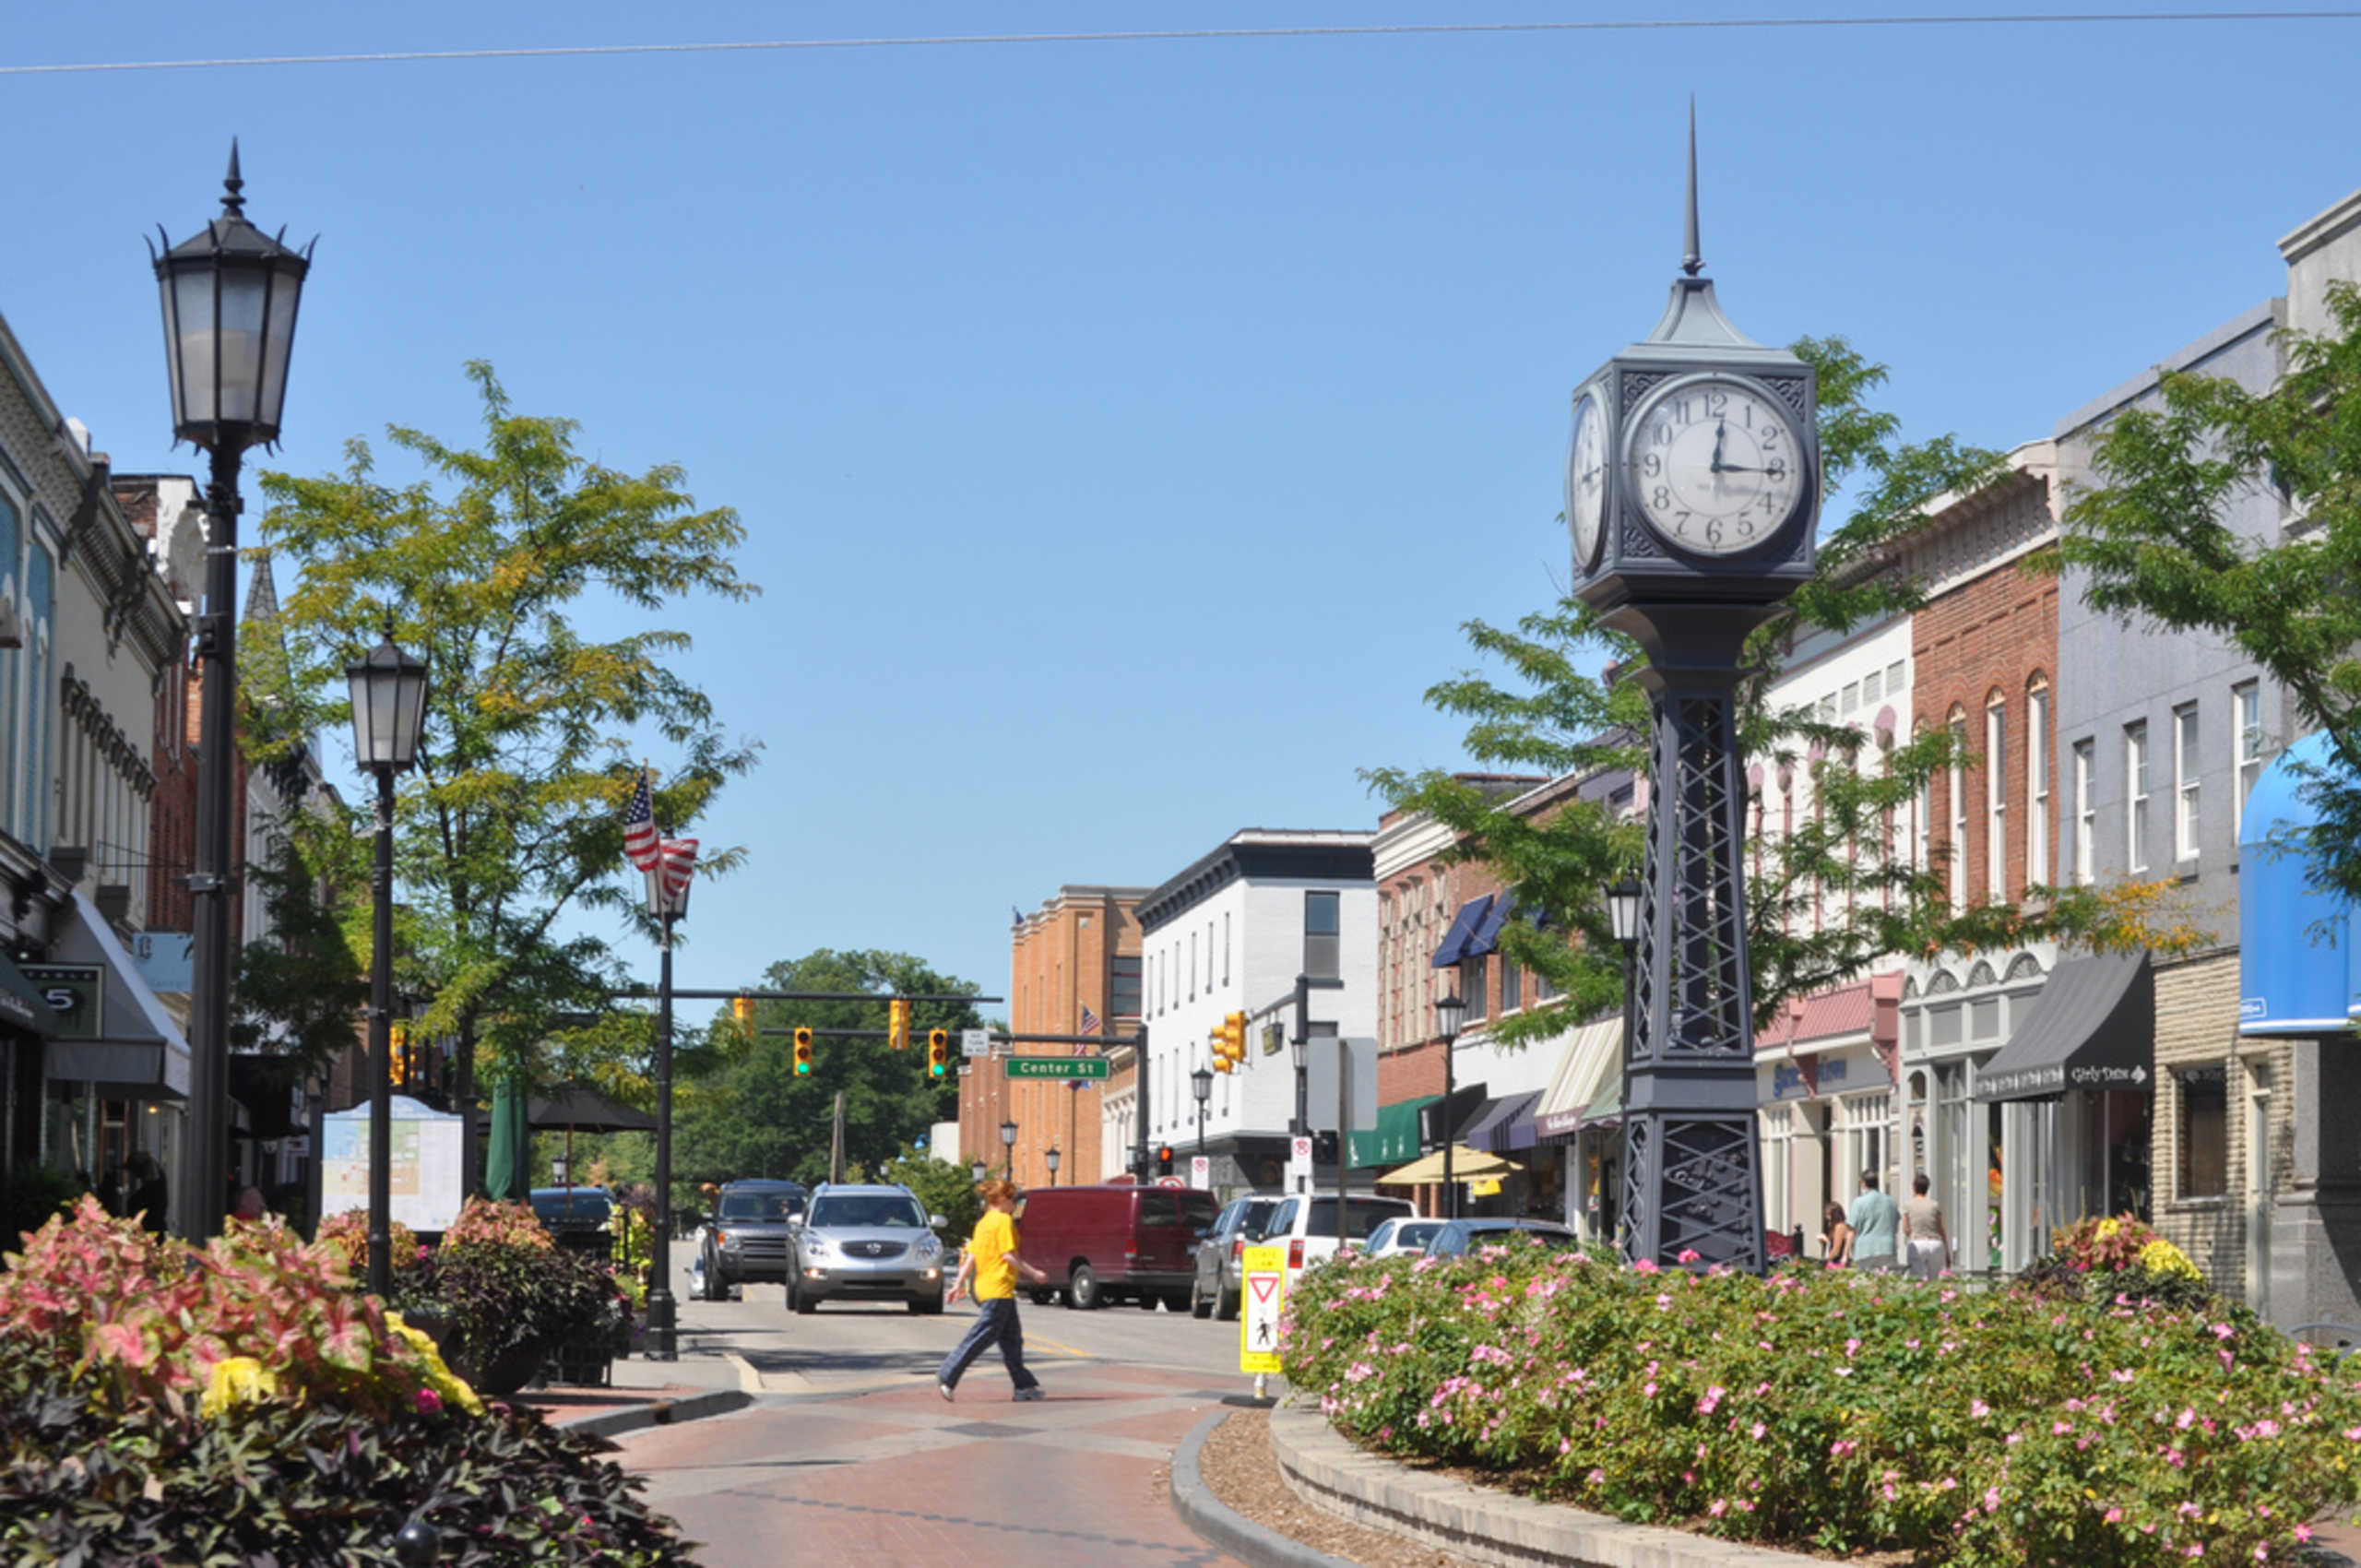 Visit Downtown Northville for great food, shopping and entertainment.